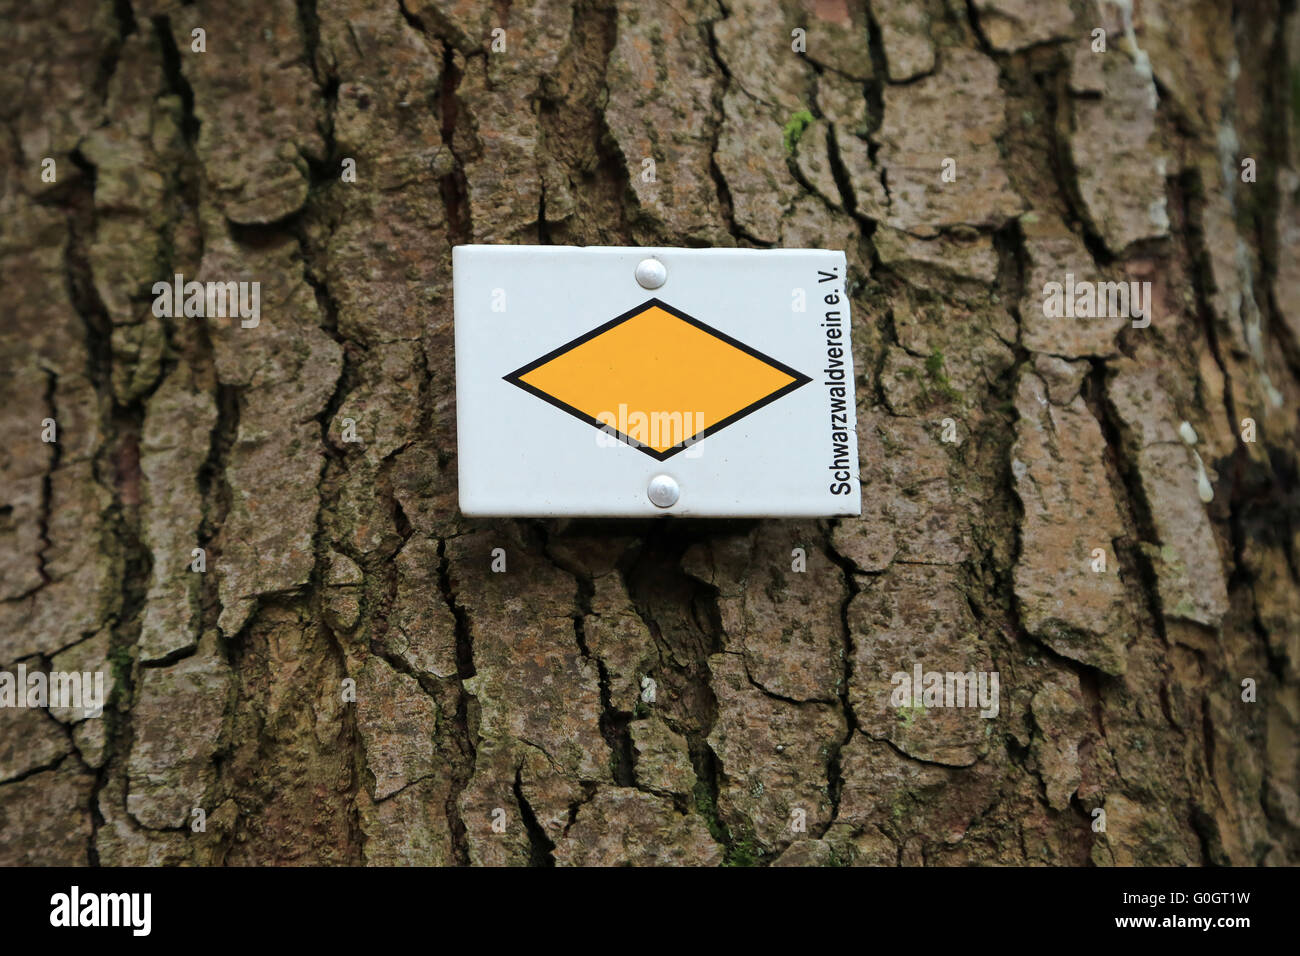 Rhombic direction sign of a hiking trail in the Black Forest Stock Photo